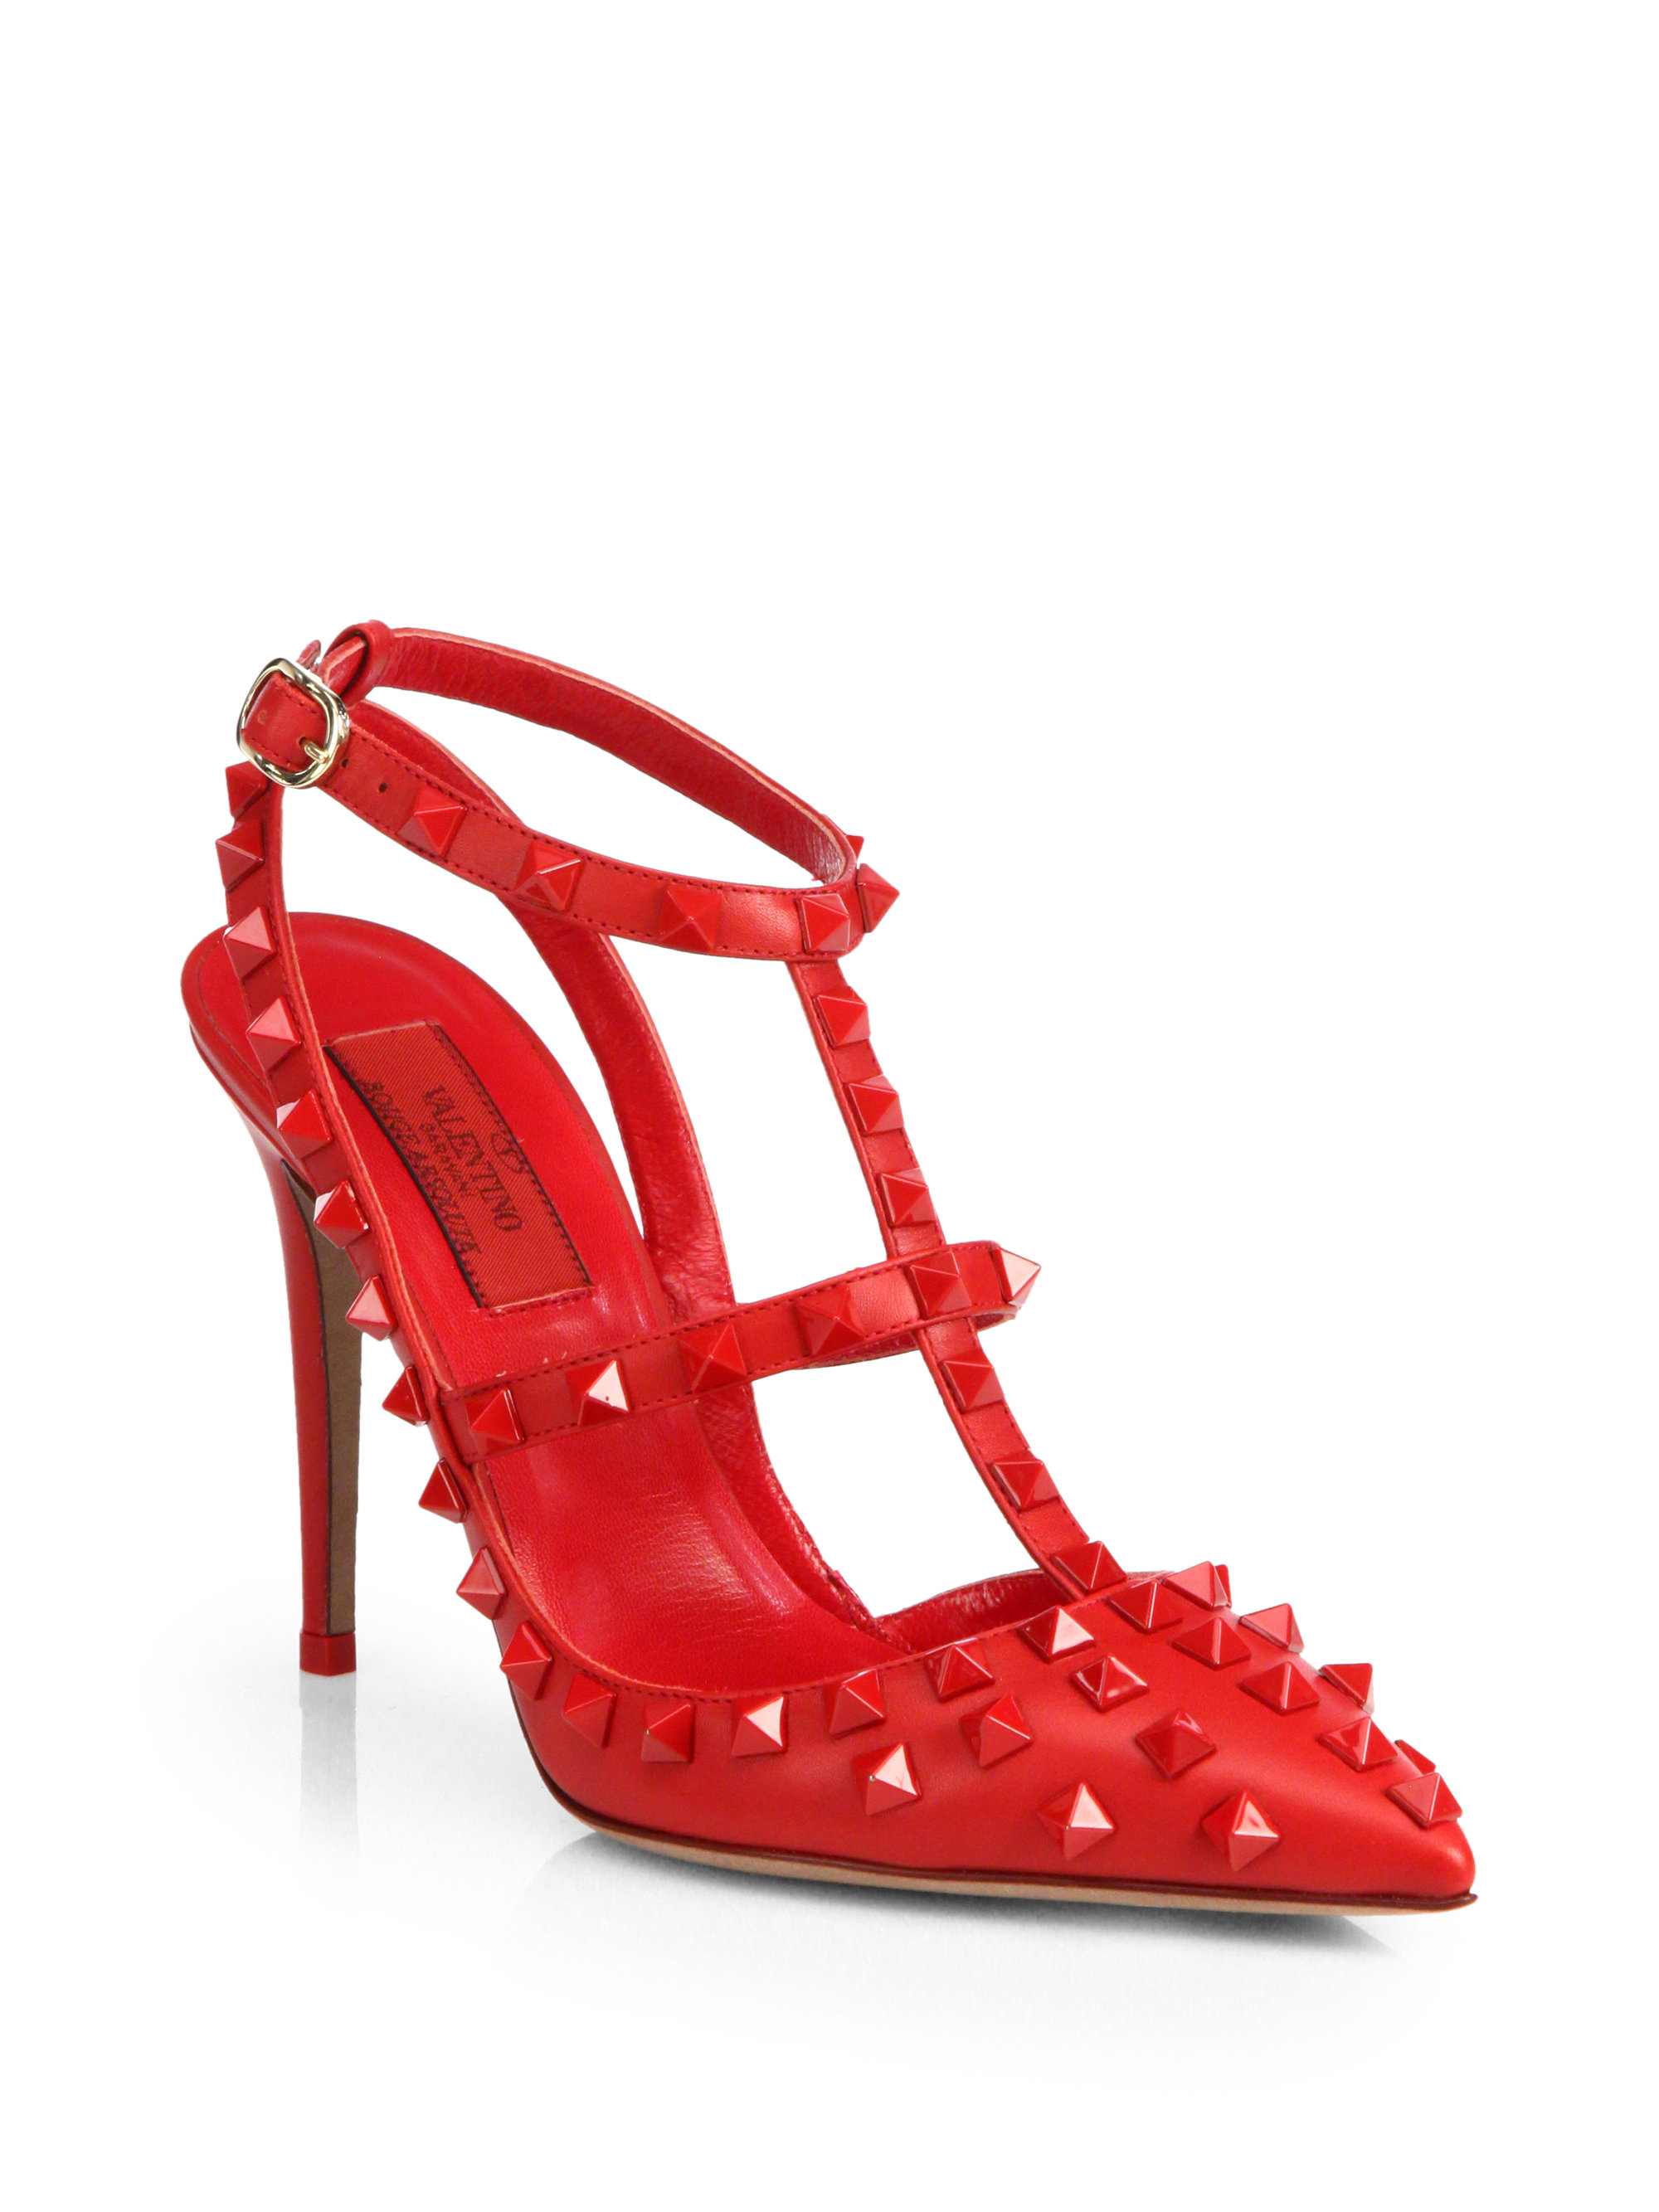 Lyst - Valentino Rouge Rockstud Leather Slingback Pumps in Red